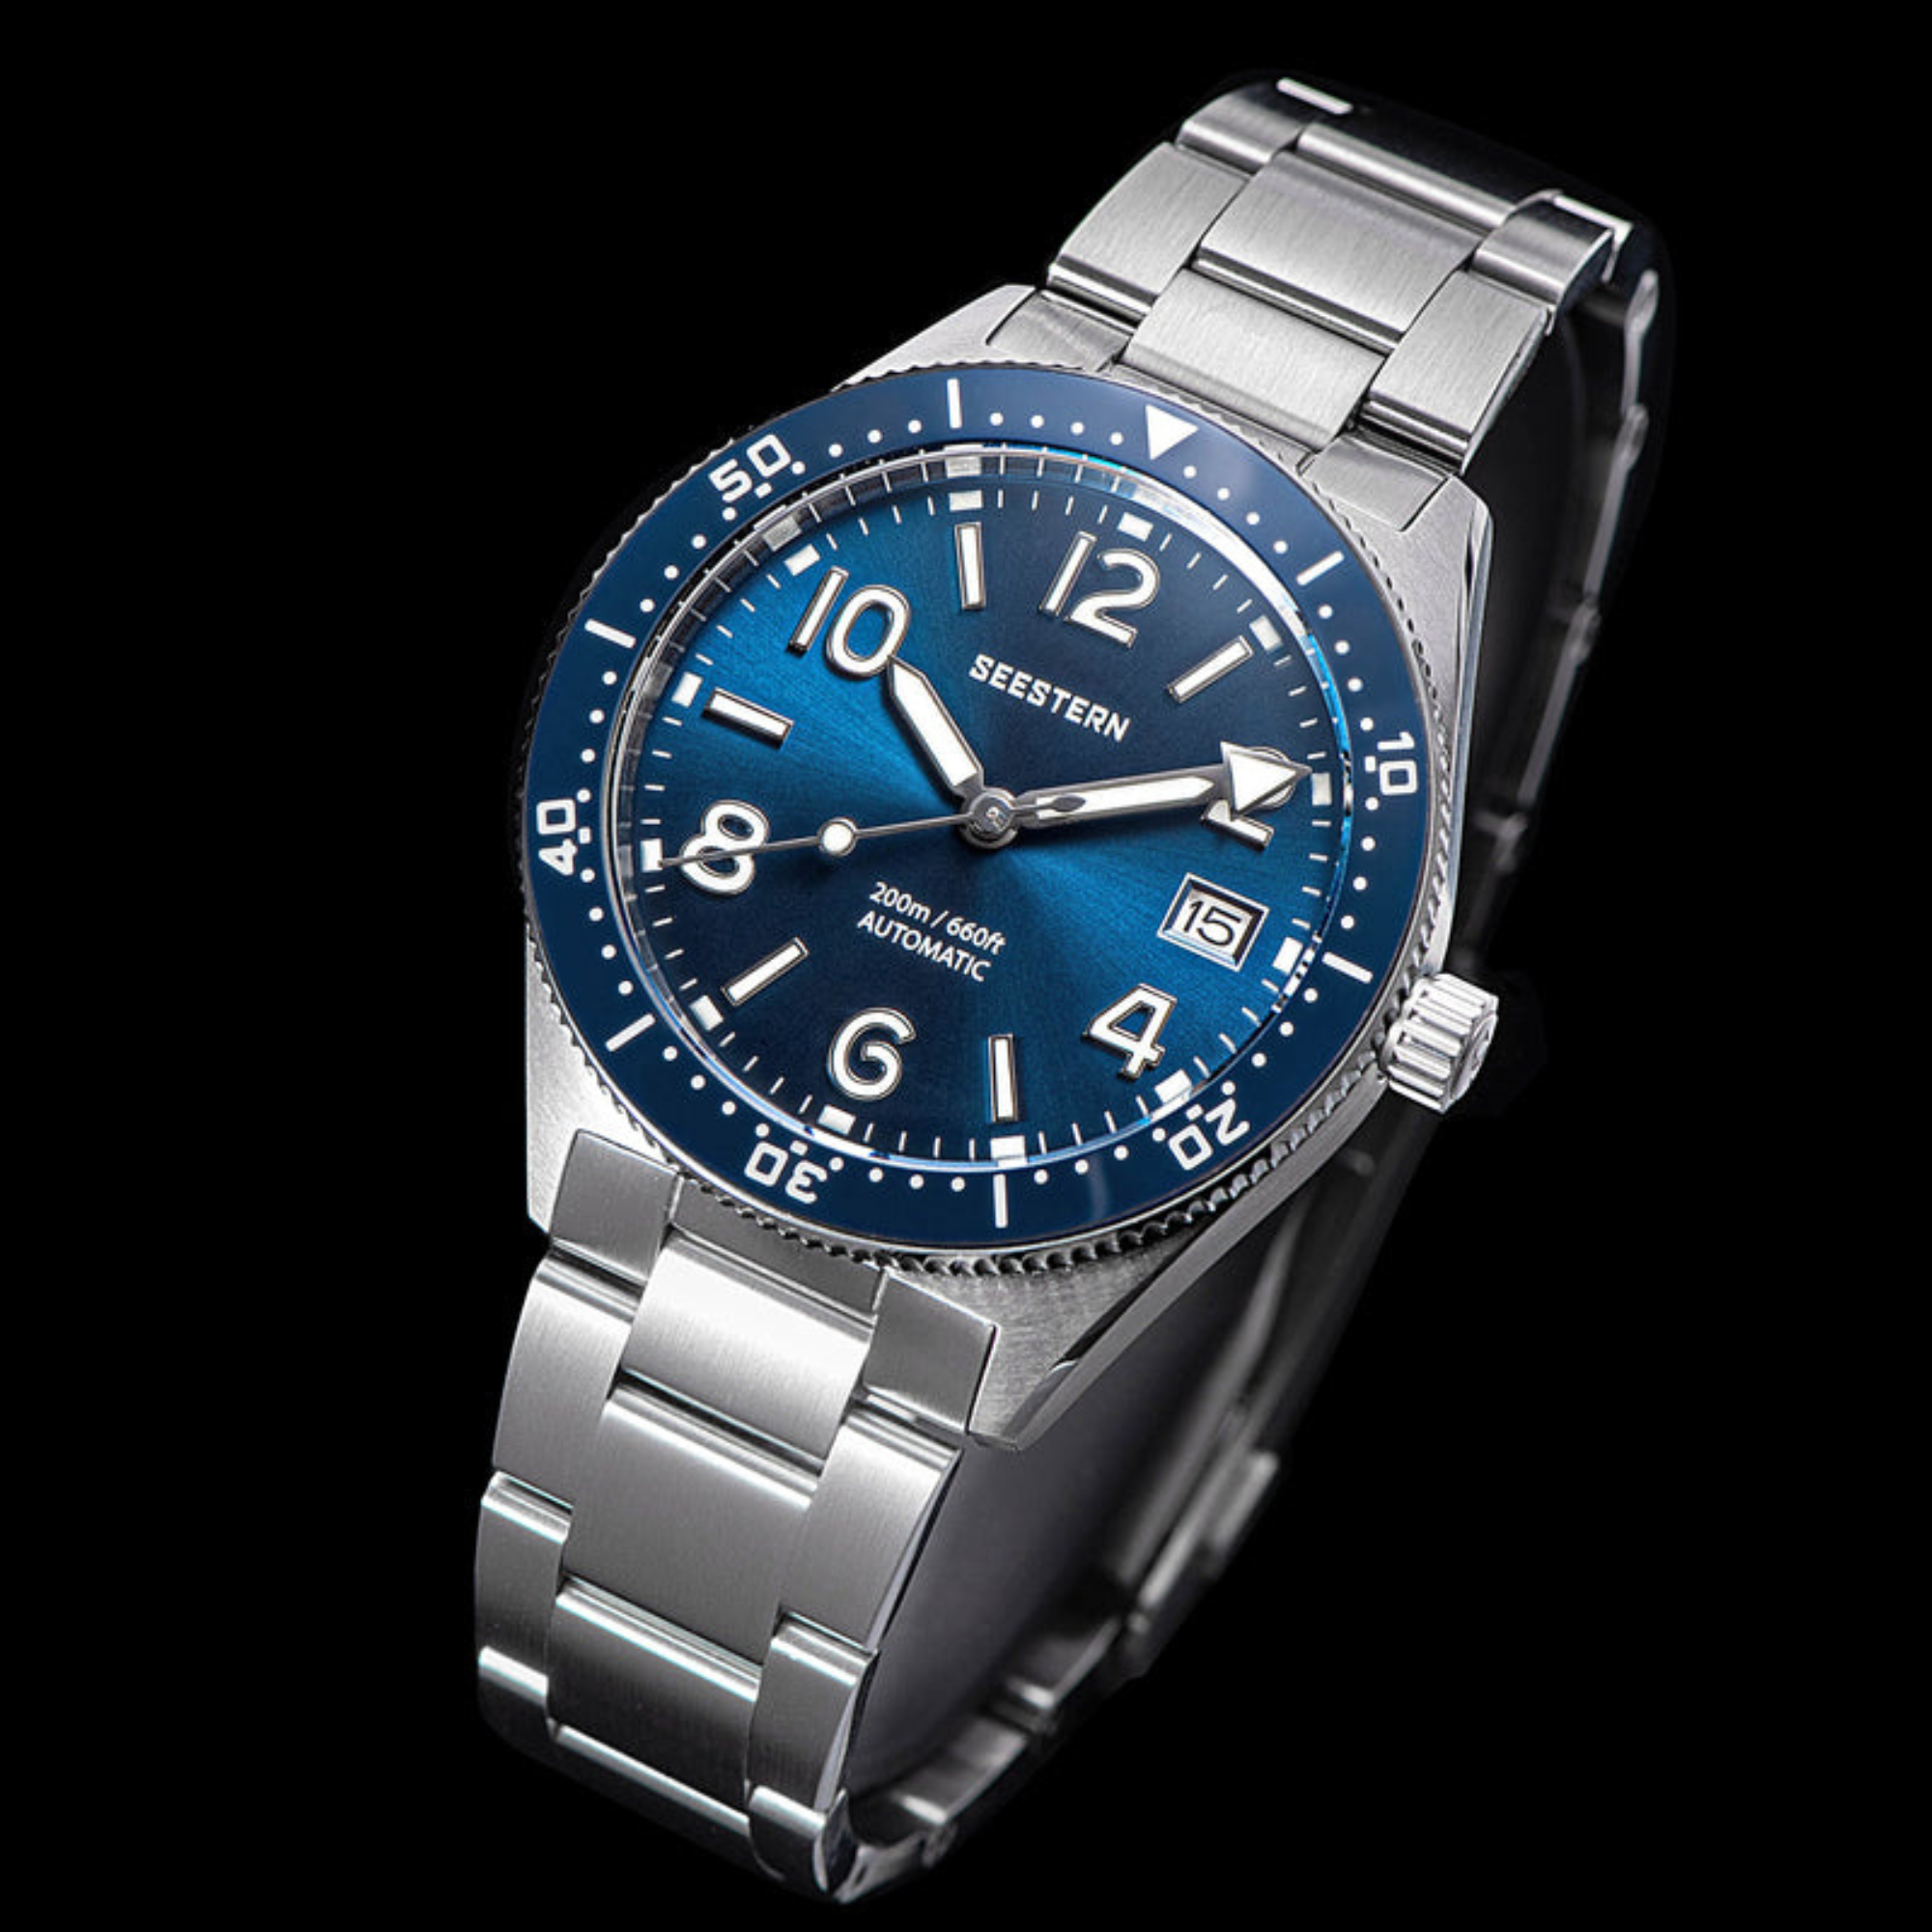 Seestern 434 Professional Diver Automatic 200m Water Resistant - V2